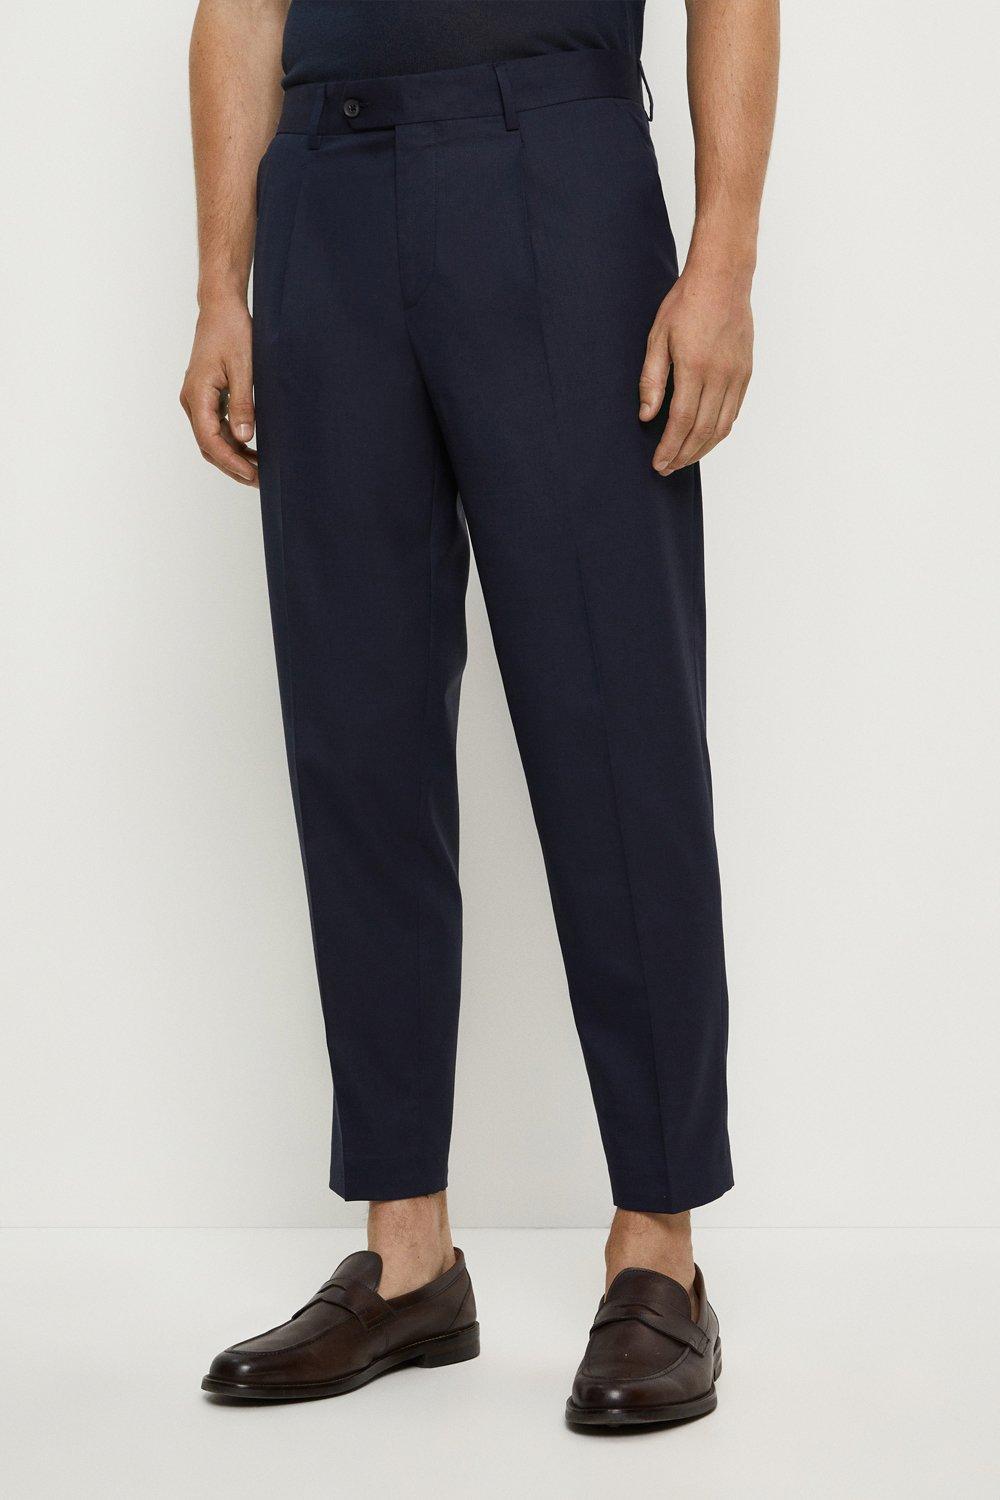 Suits | Tapered Fit Navy 1904 Suit Trousers | Burton